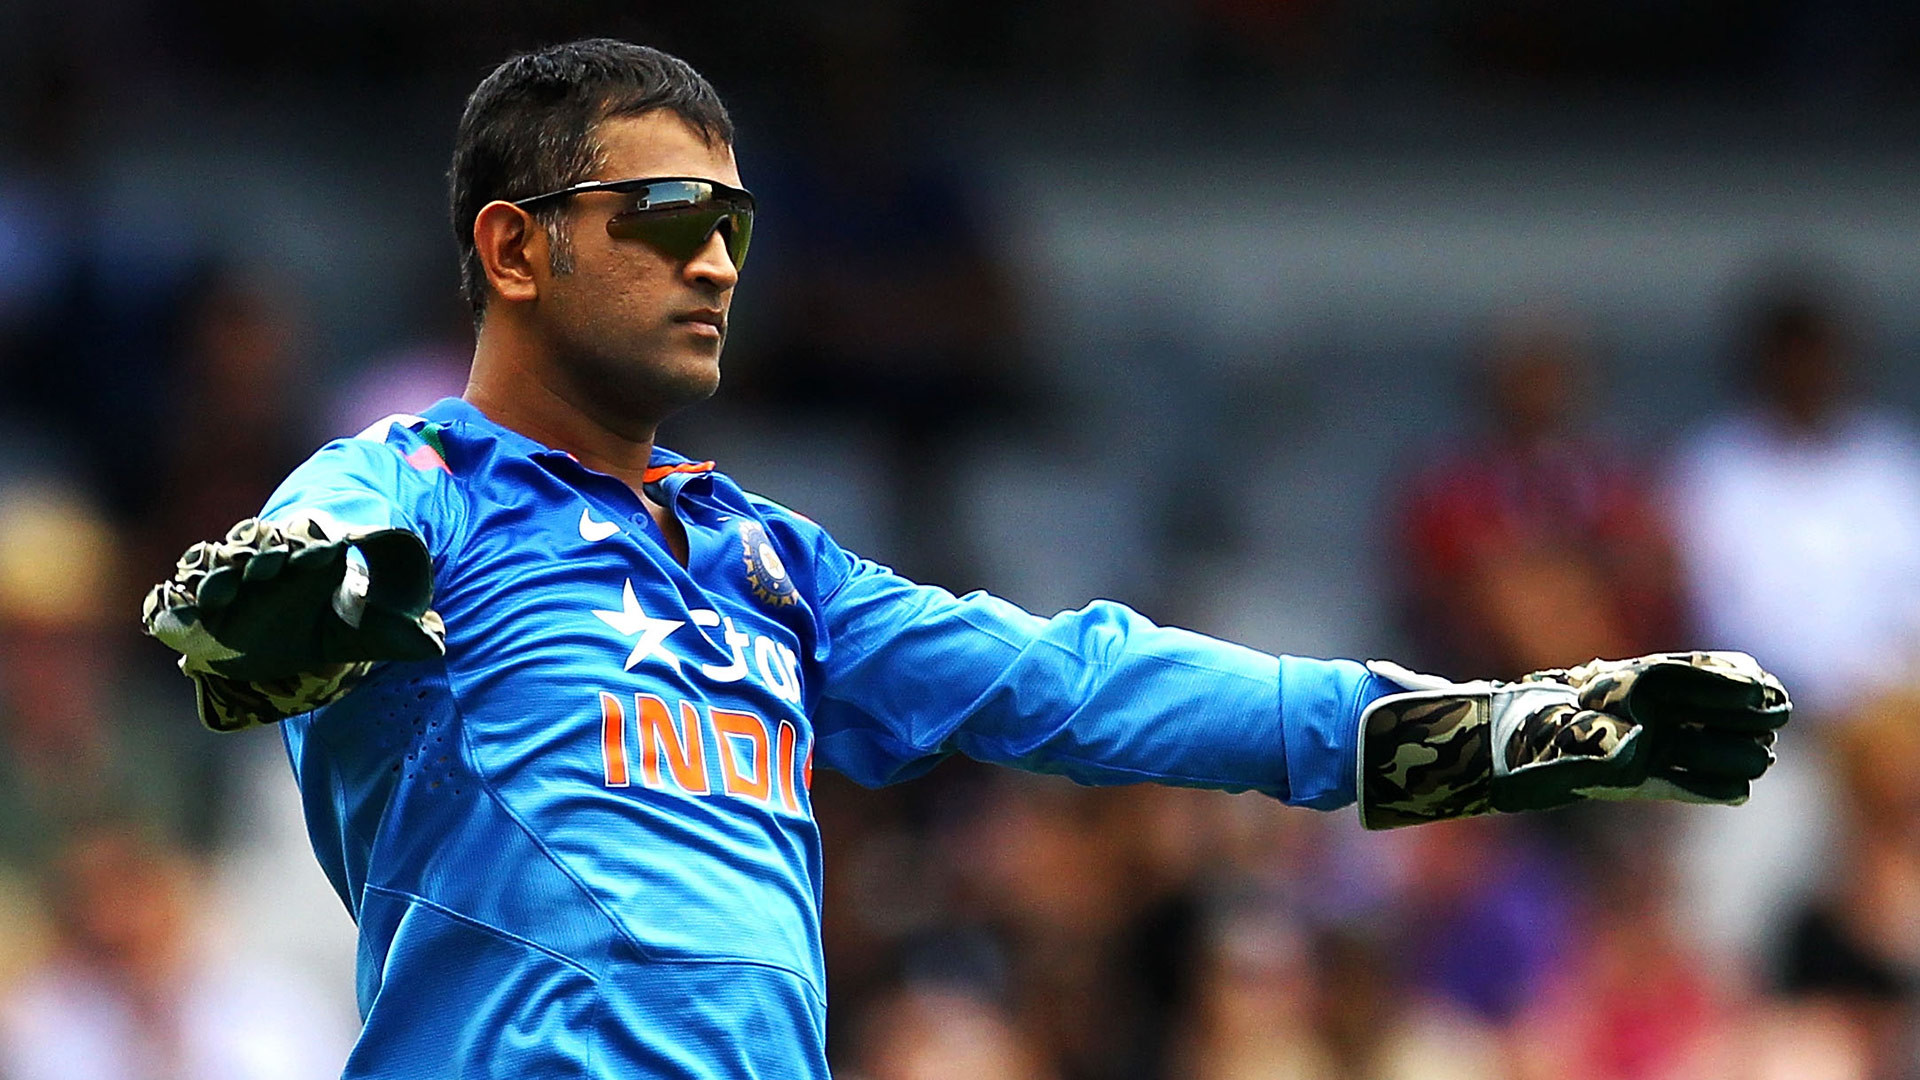 515 MS Dhoni HD Wallpapers Desktop Background  Android  iPhone  1080p 4k 680x1280 2023